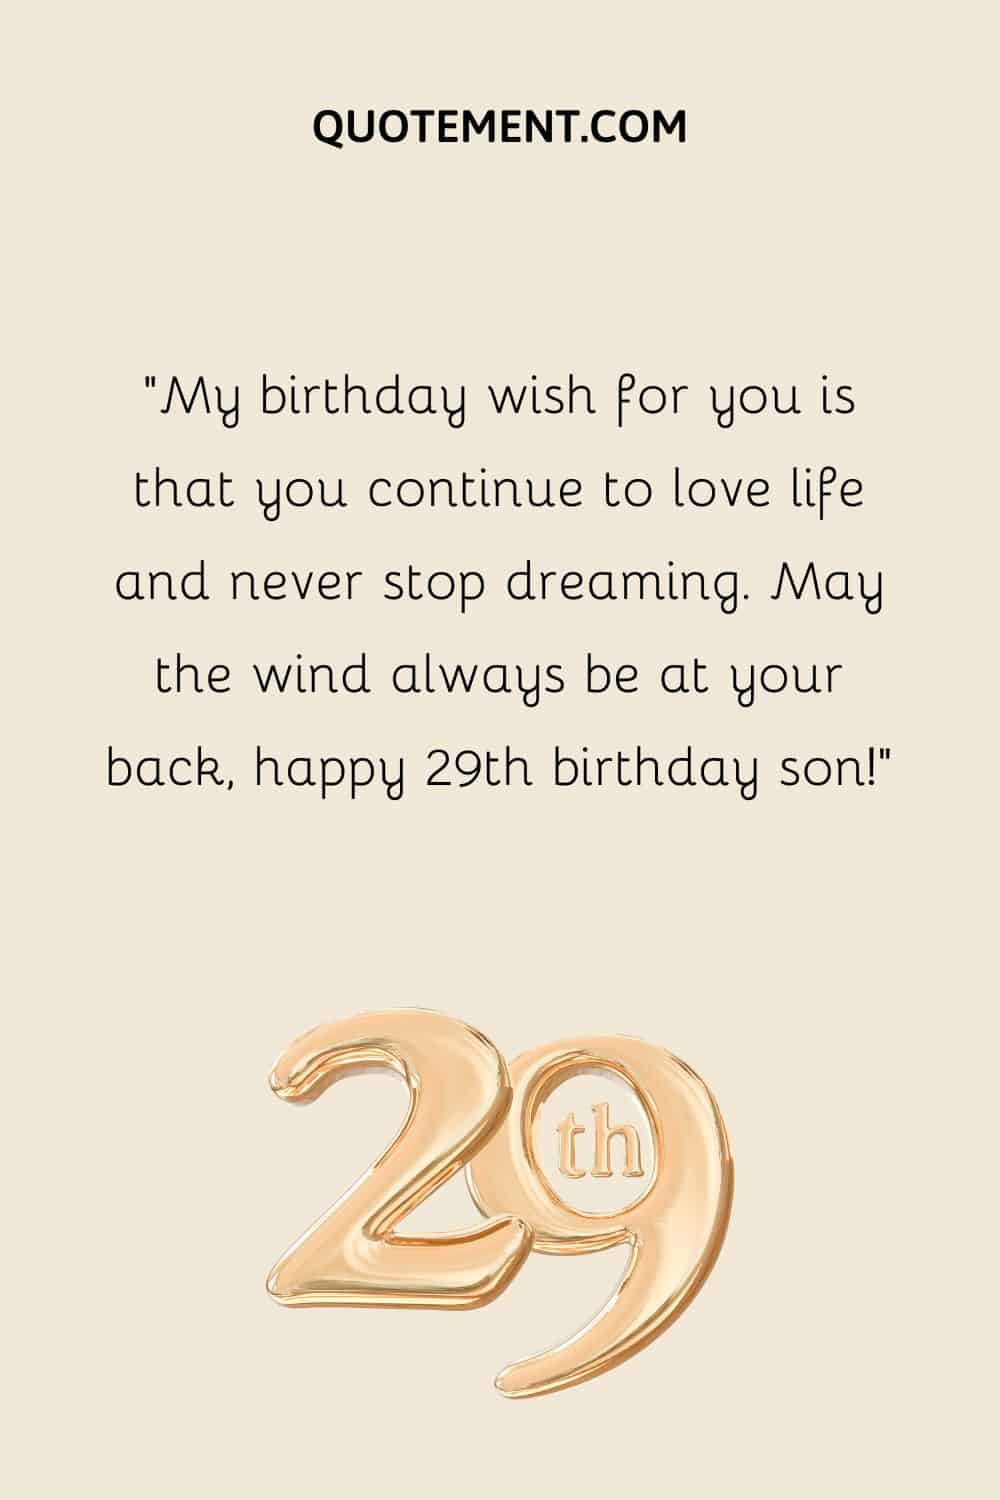 My birthday wish for you is that you continue to love life and never stop dreaming